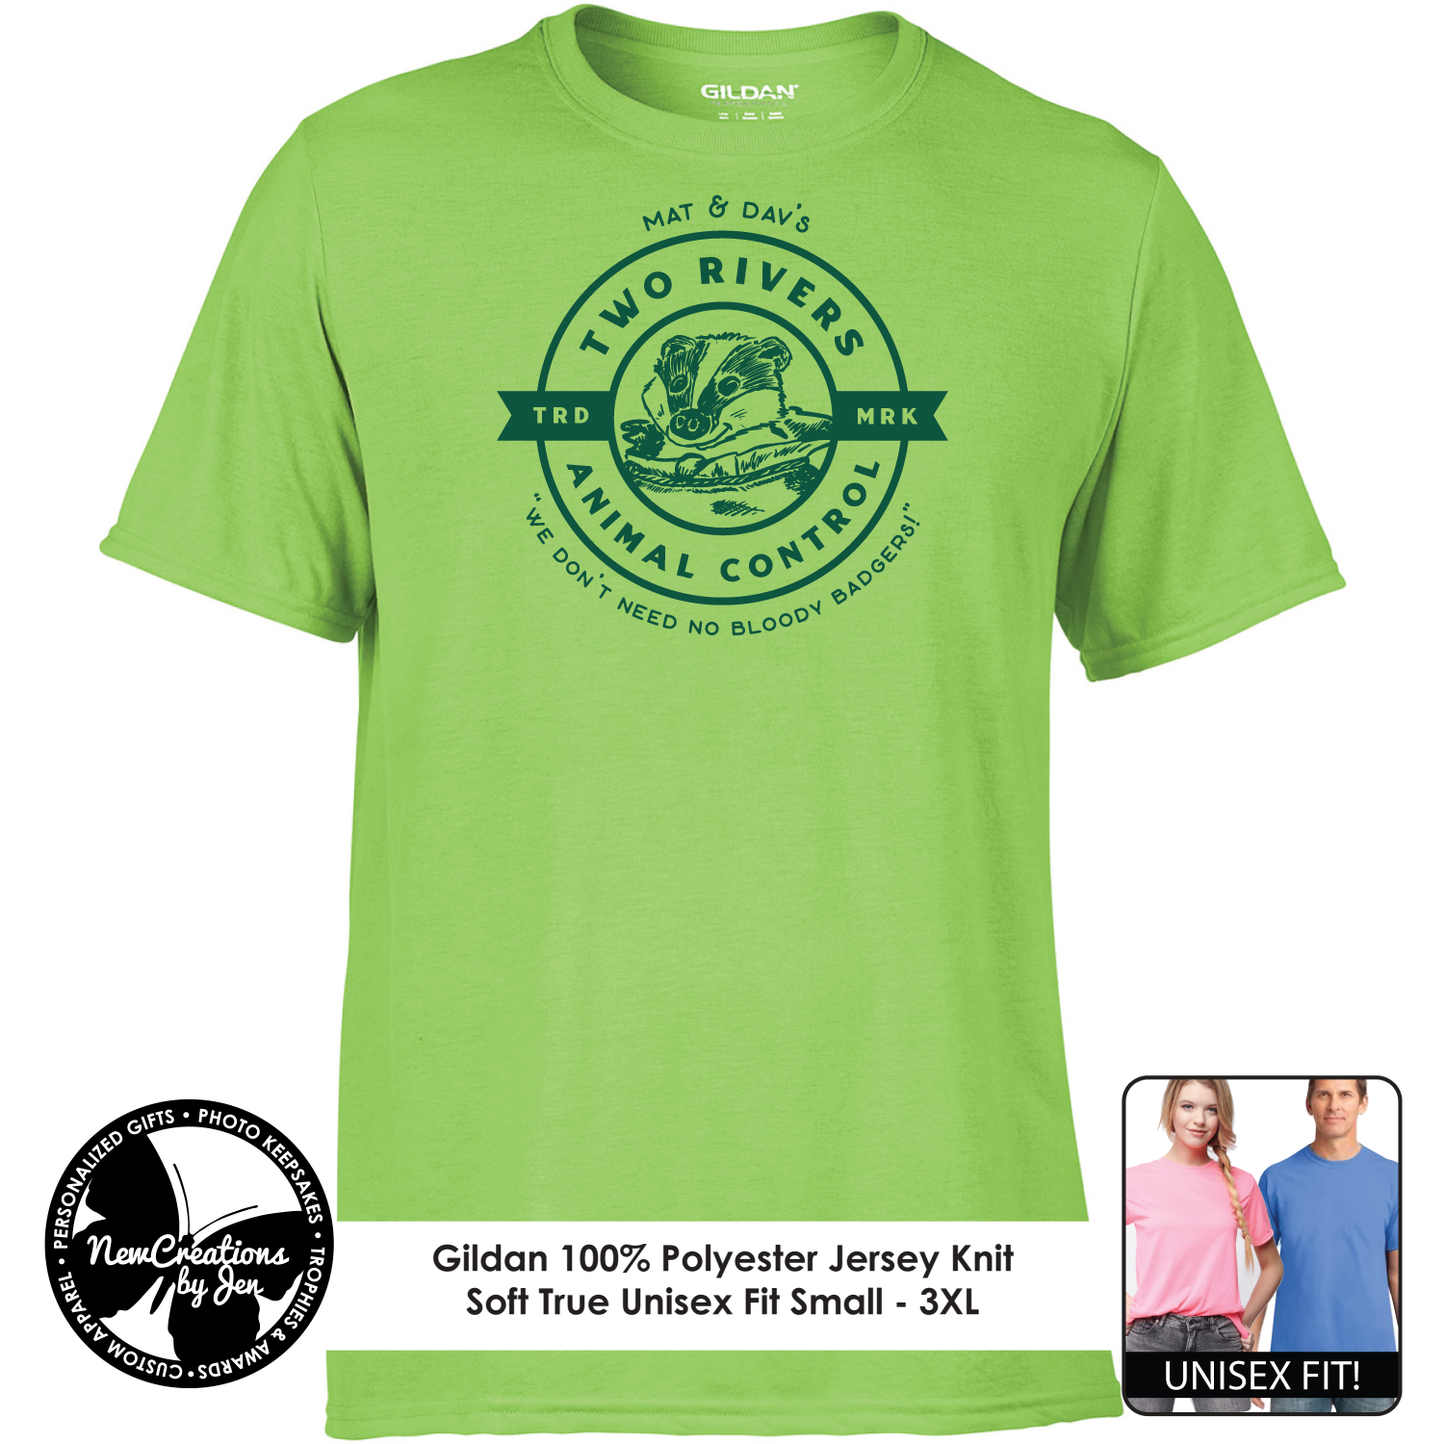 Two Rivers Animal Control - Wheel of Time Inspired  Souvenir Lightweight  Tees